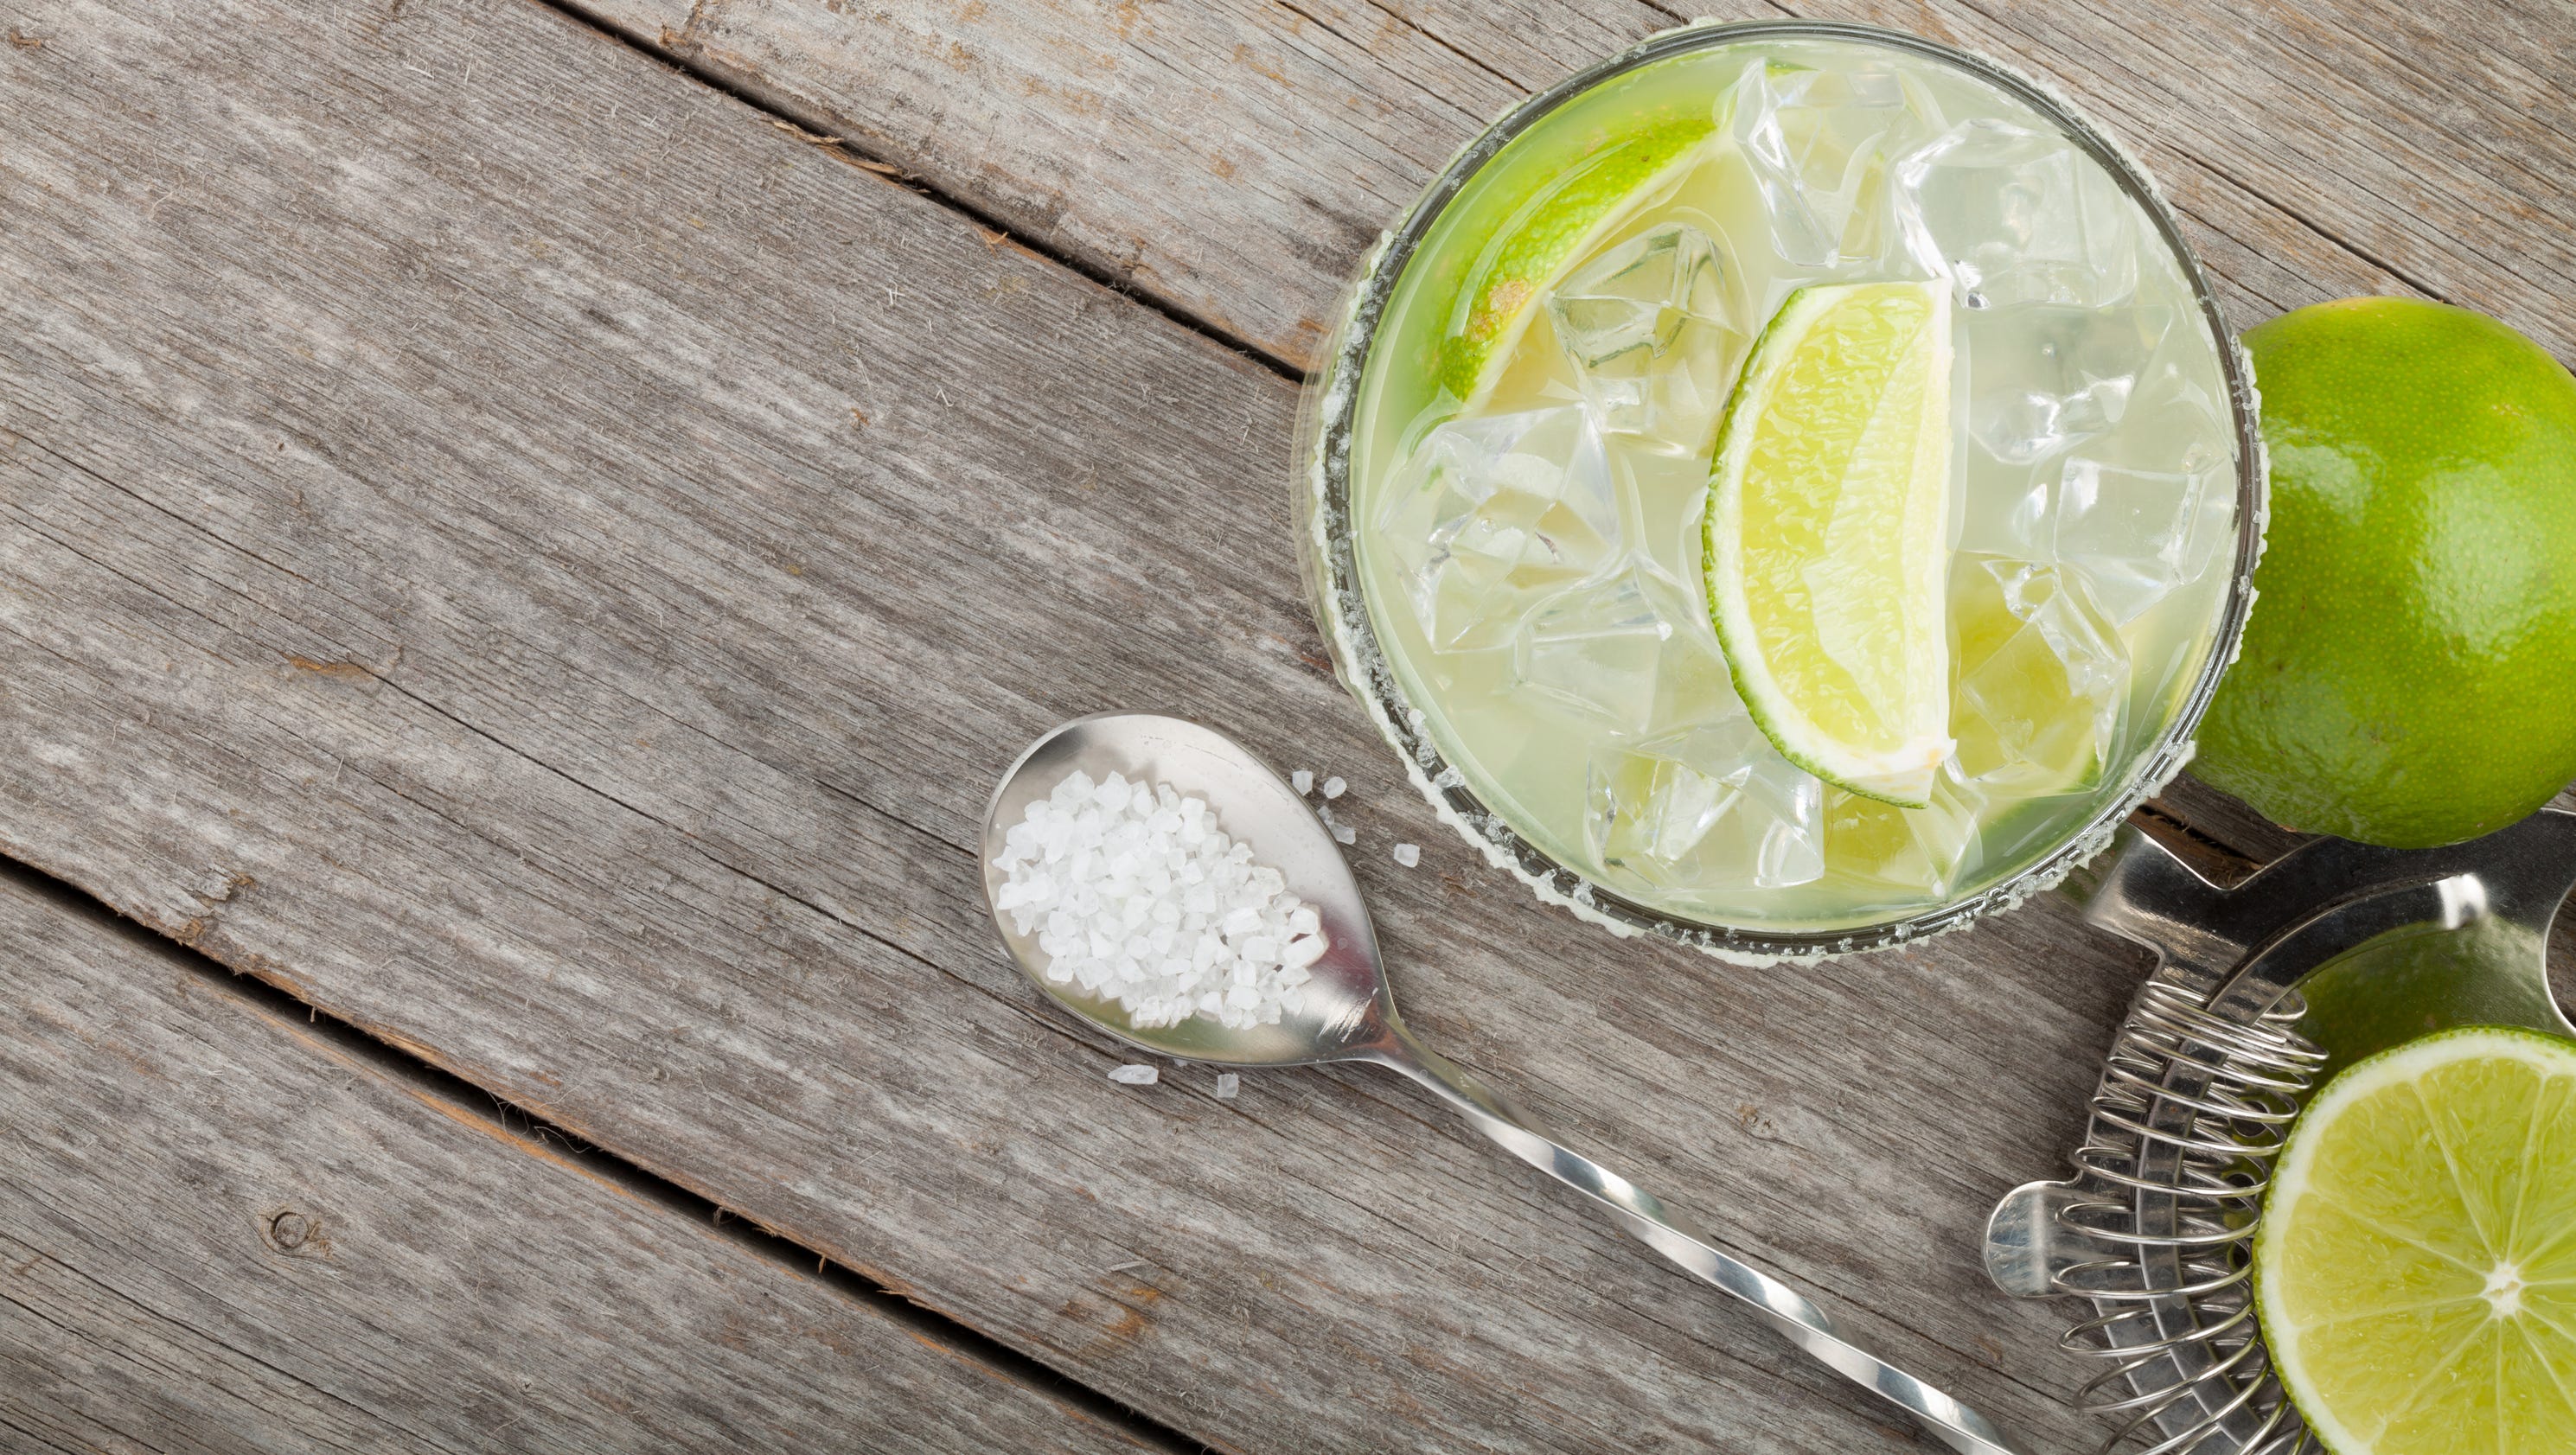 National Margarita Day: What are you doing after work? - Statesman Journal